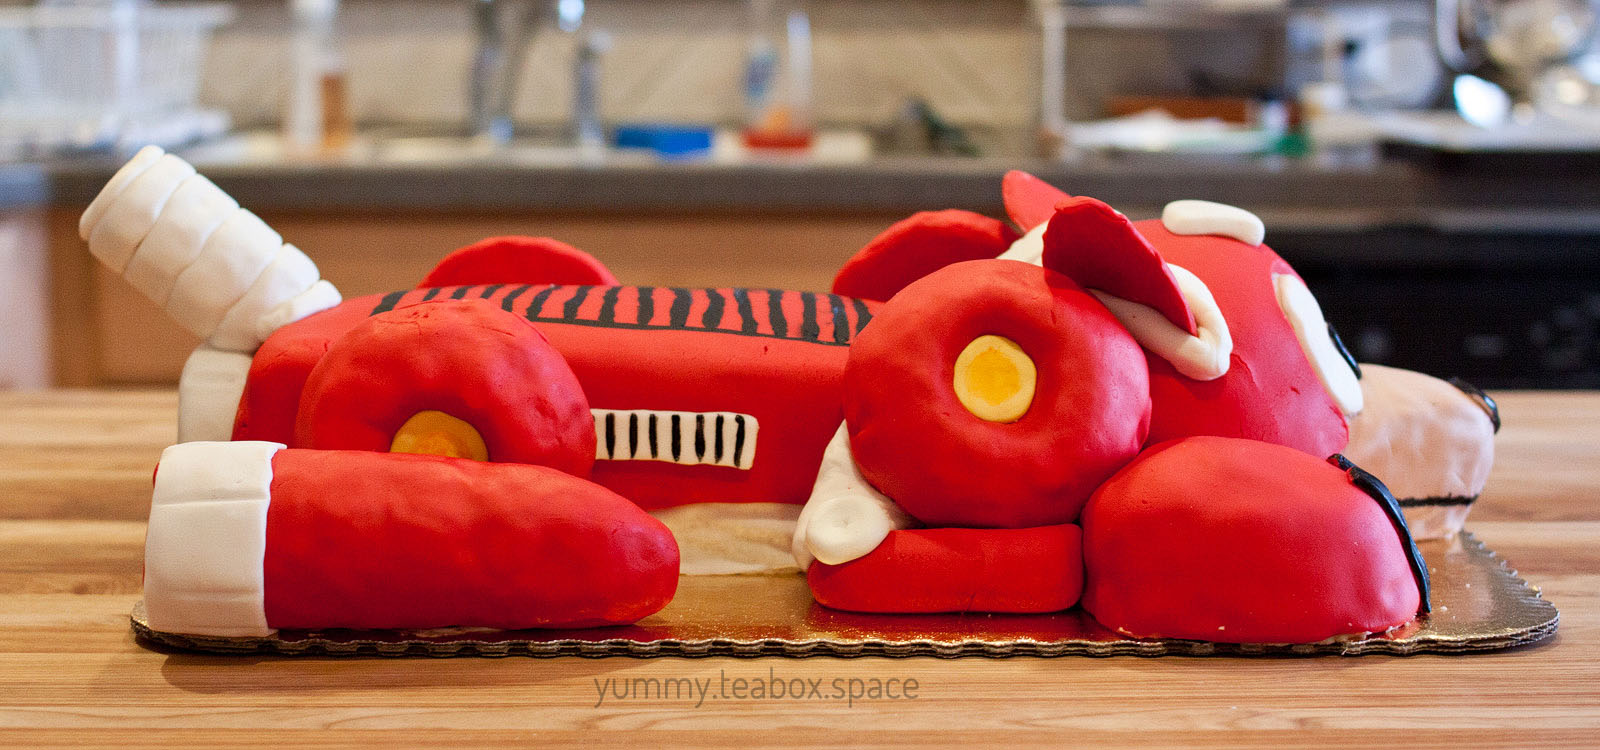 Side view of a cake that looks like the red robot dog, Rush, from Mega Man